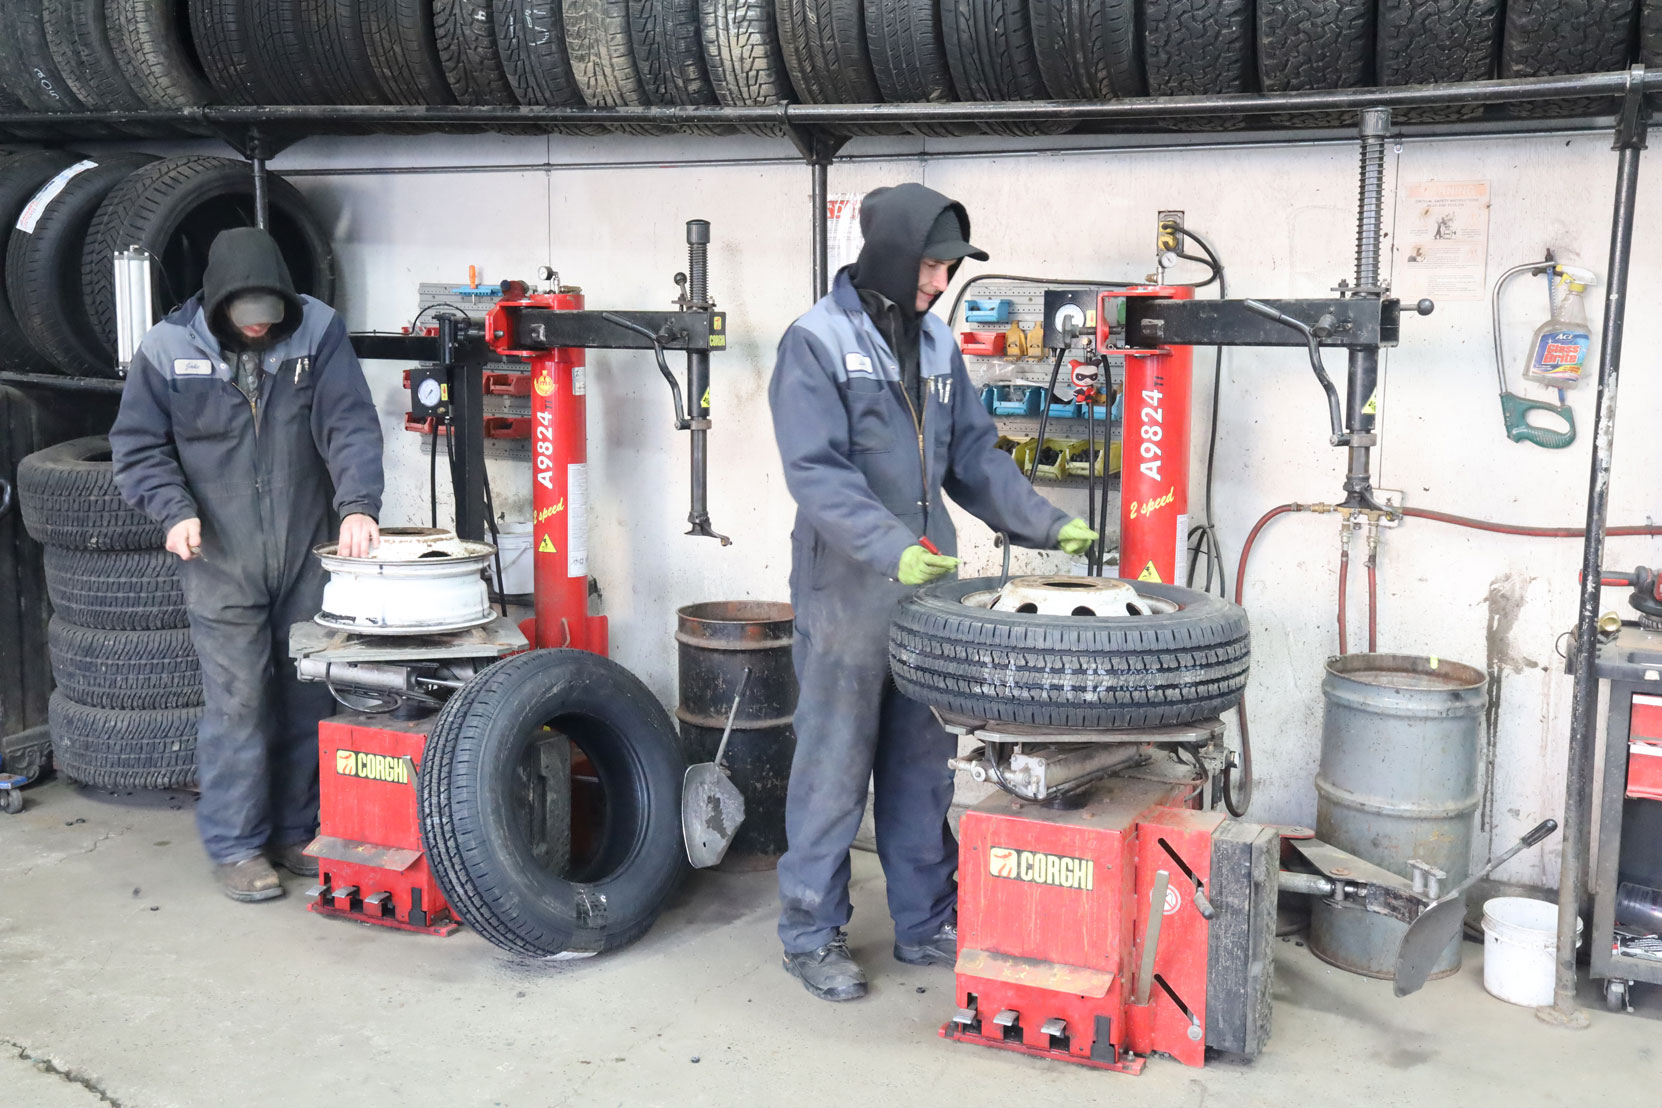 New B.F. Goodrich tires being put on the wheels before being installed on the steering axle of our Ford E450 bus at Joe's Tire Hospital, February 2023 [photo: West Coast Driver Training]